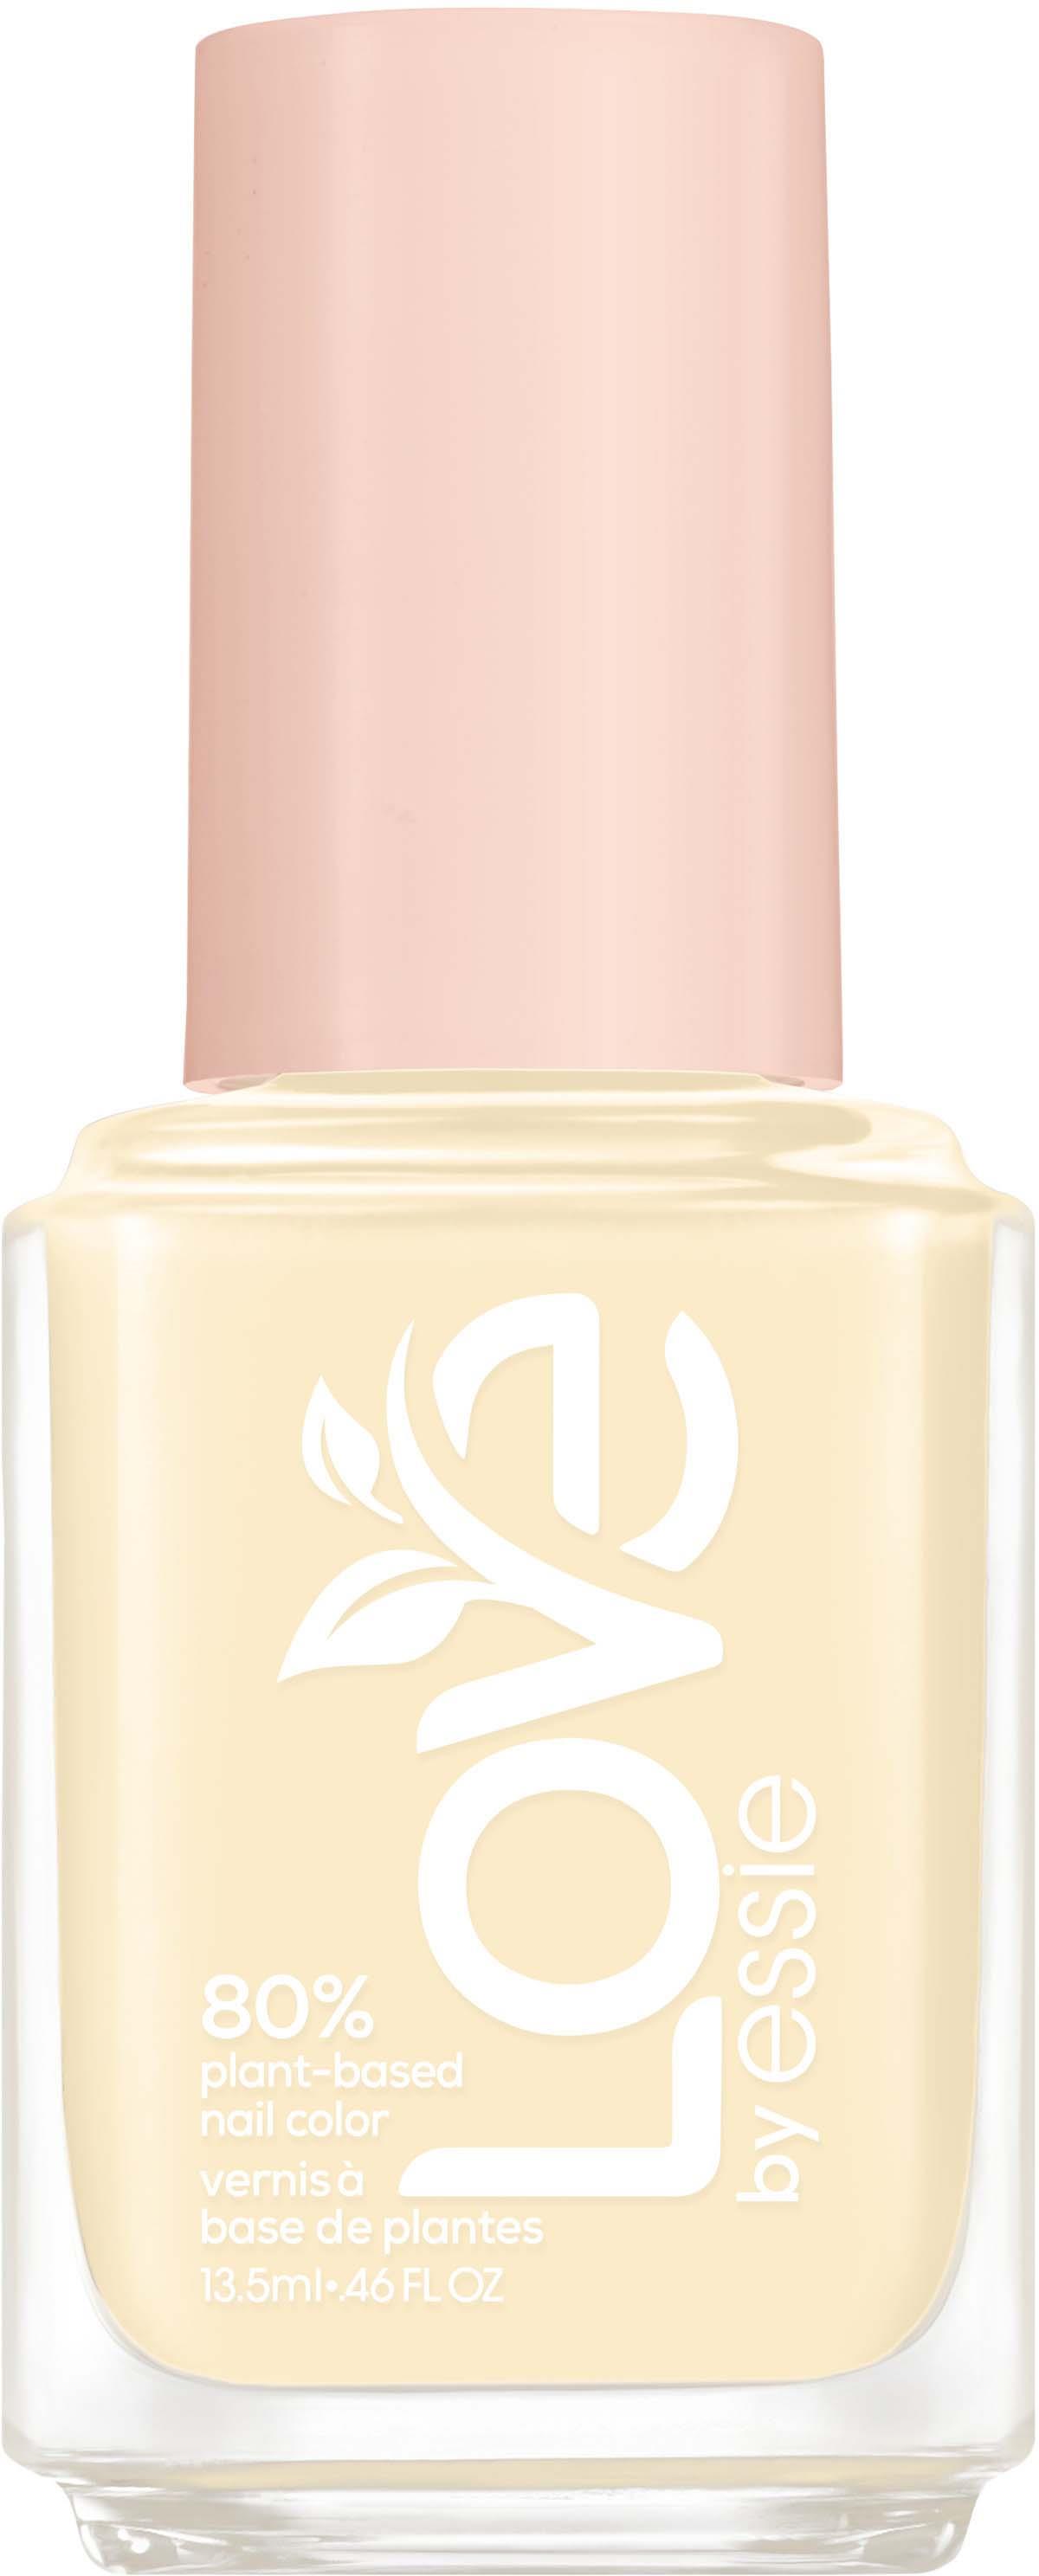 On Nail The by Essie Essie Brighter Side Plant-based 230 LOVE Color 80%